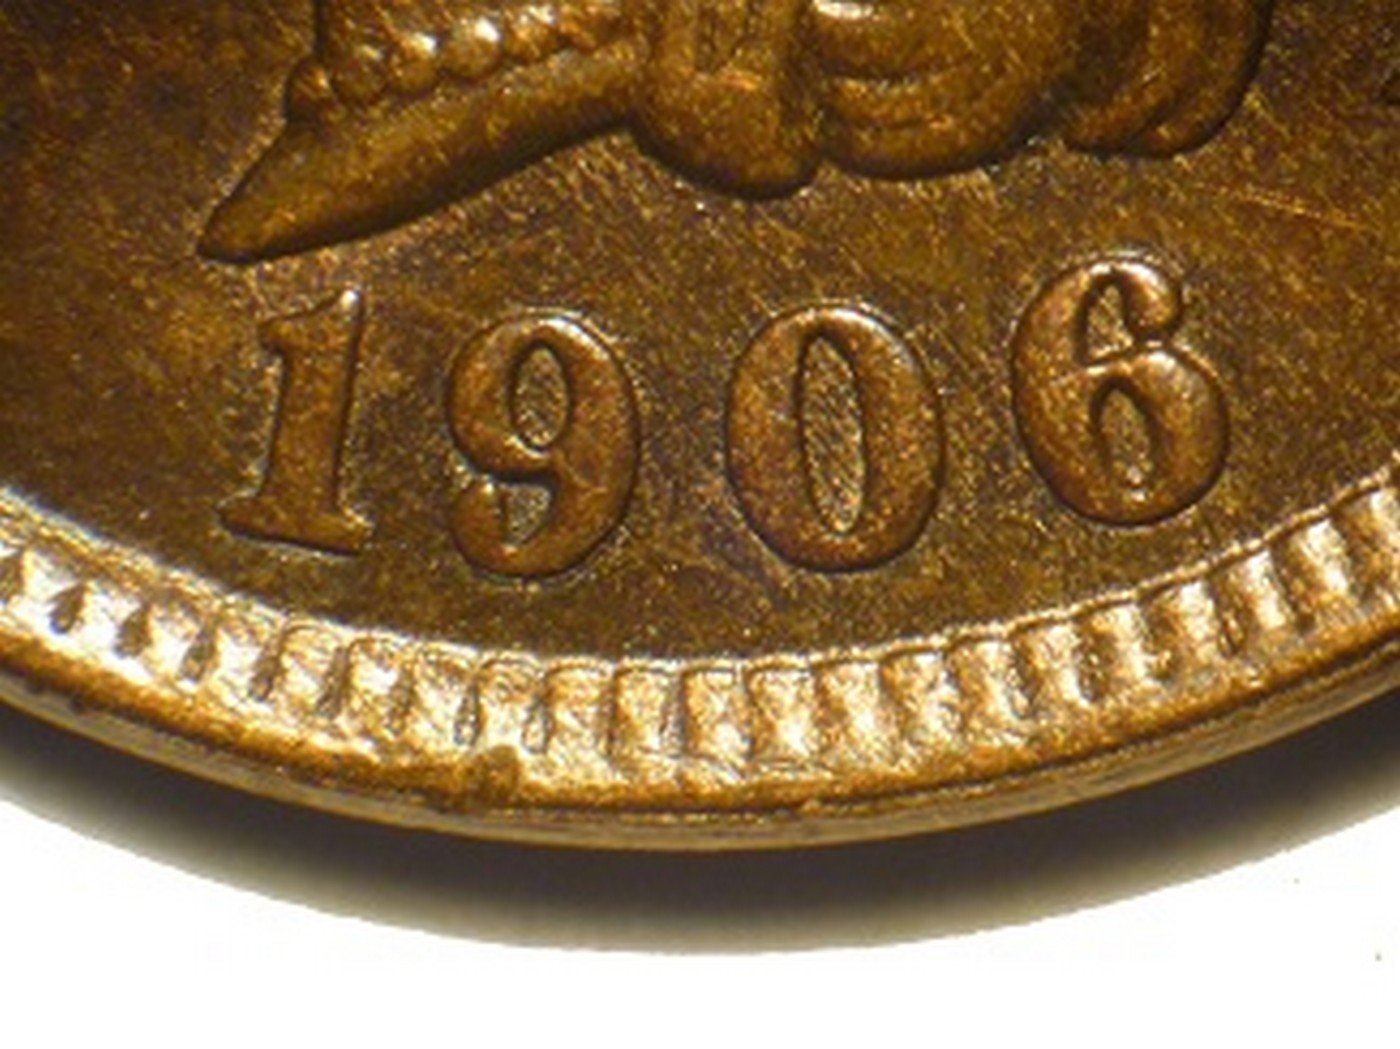 1906 RPD-012 - Indian Head Penny - Photo by David Poliquin